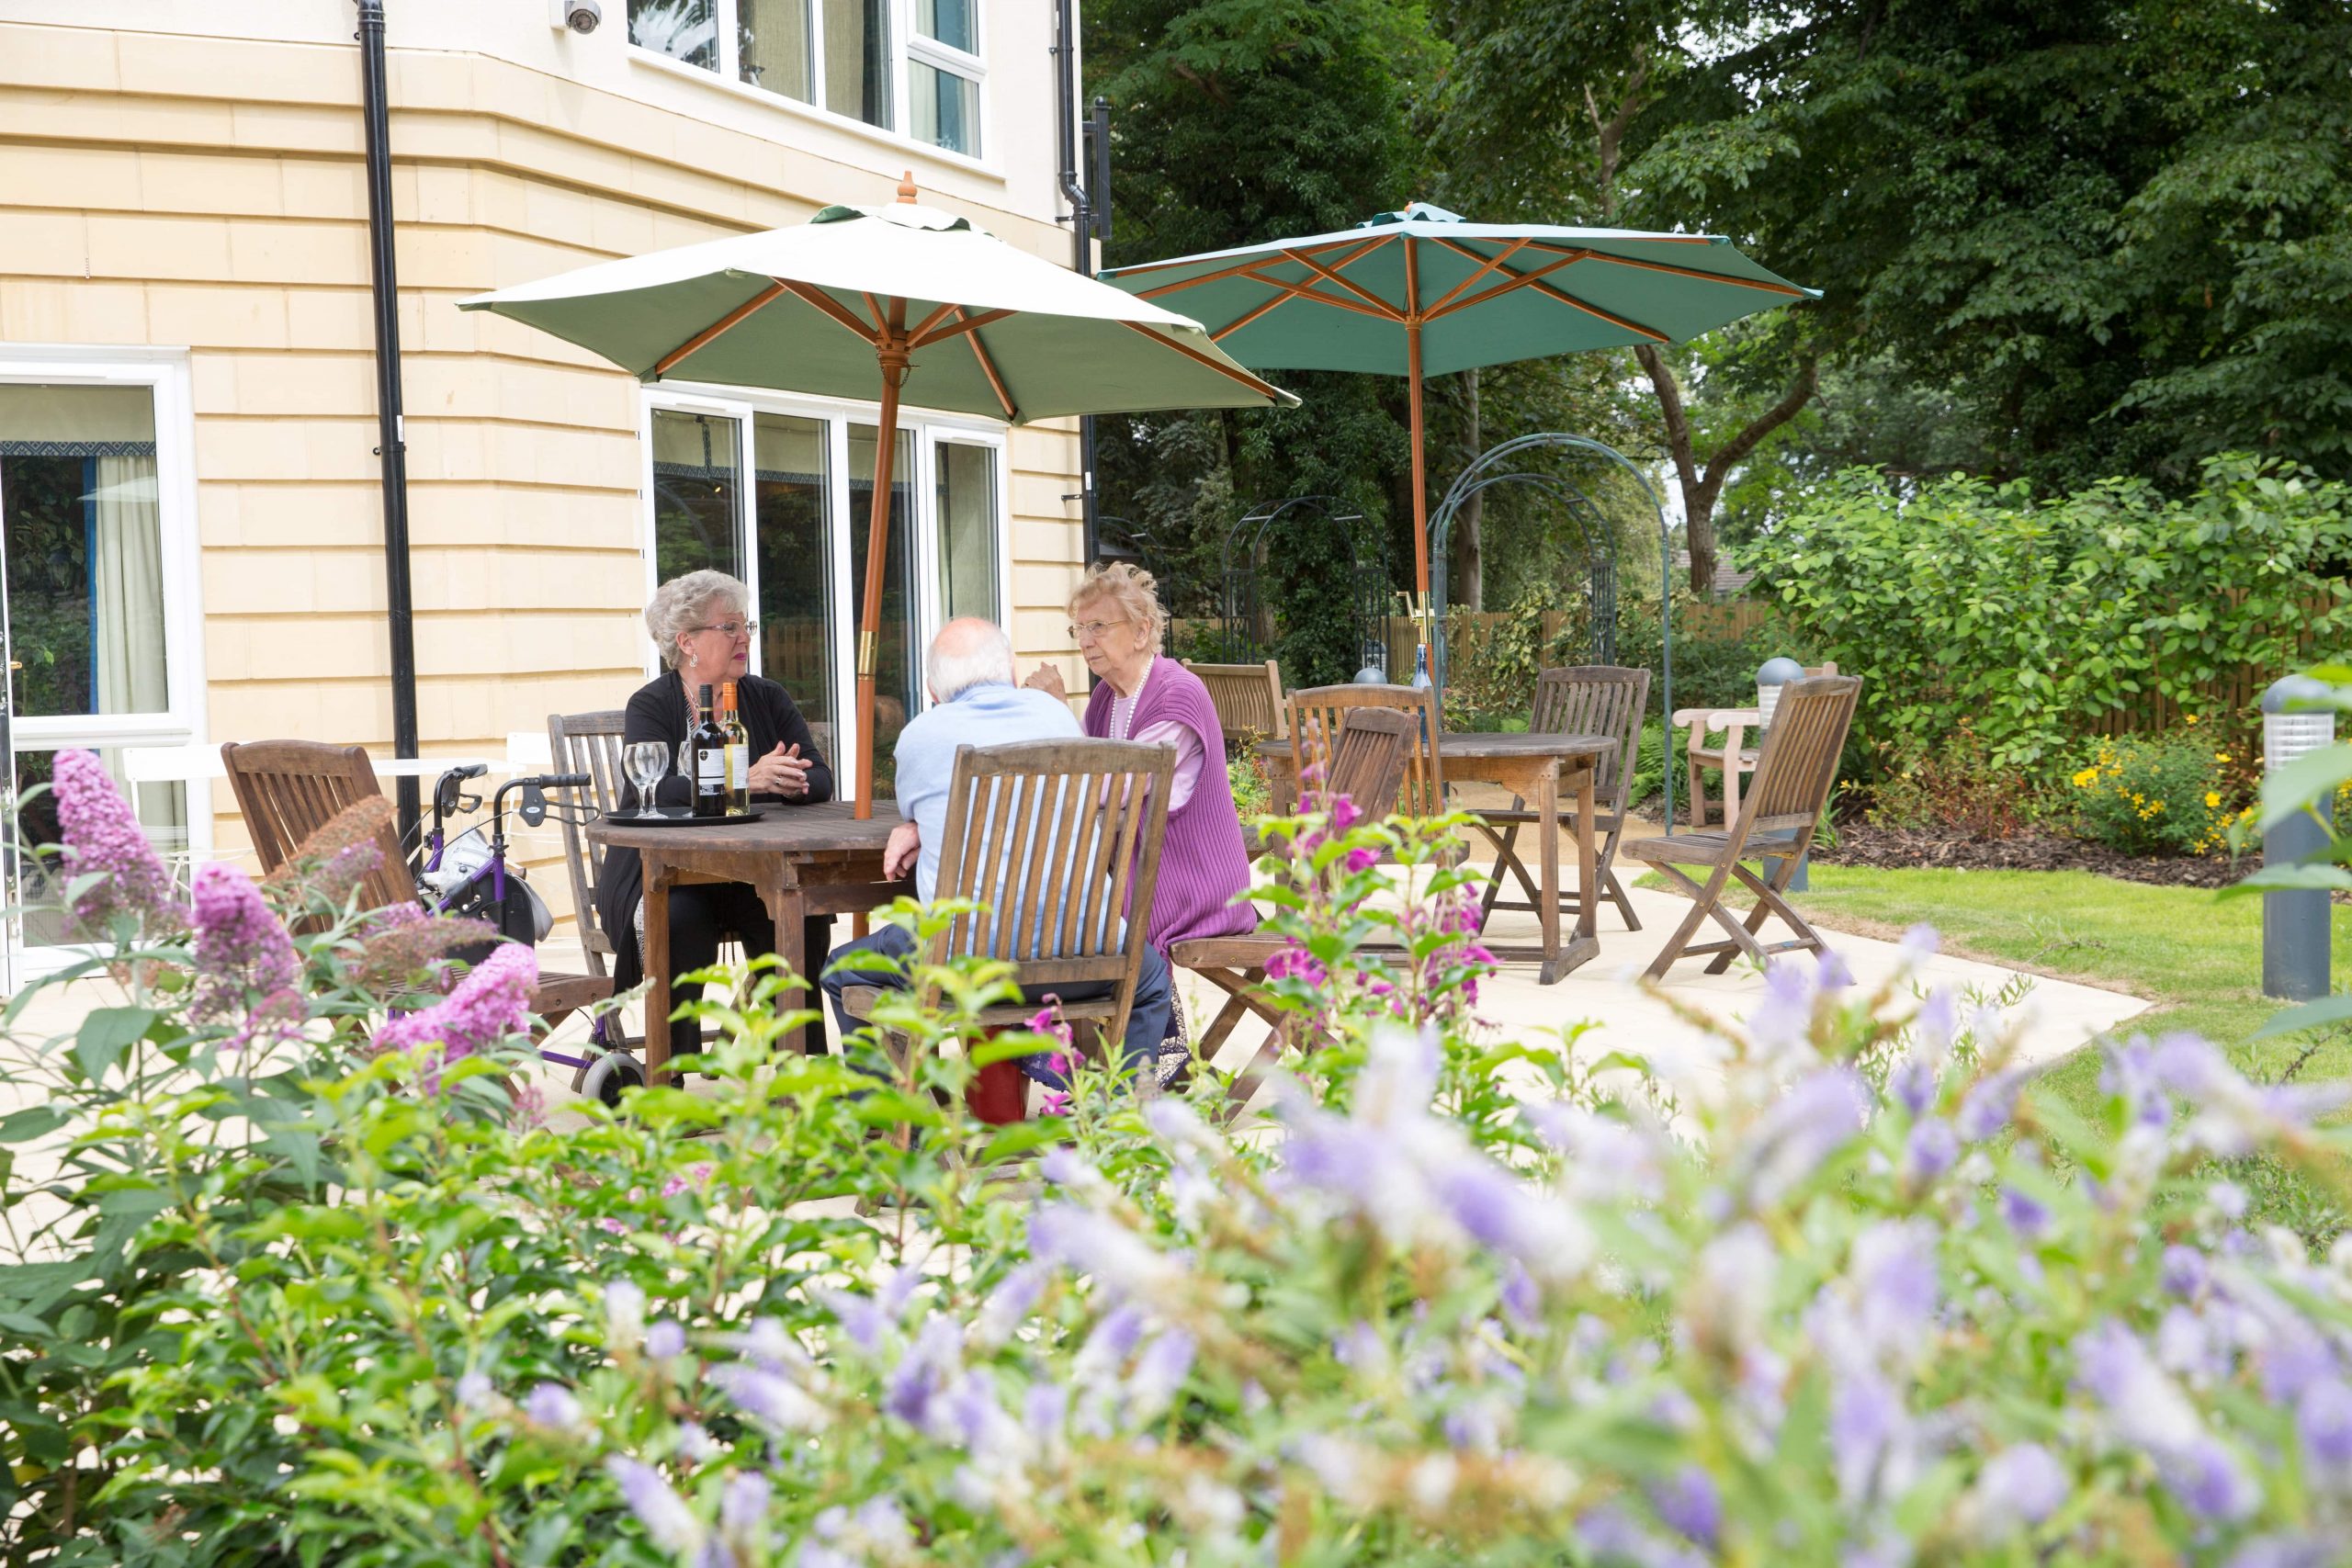 Cuffley Manor Care home in Potters Bar